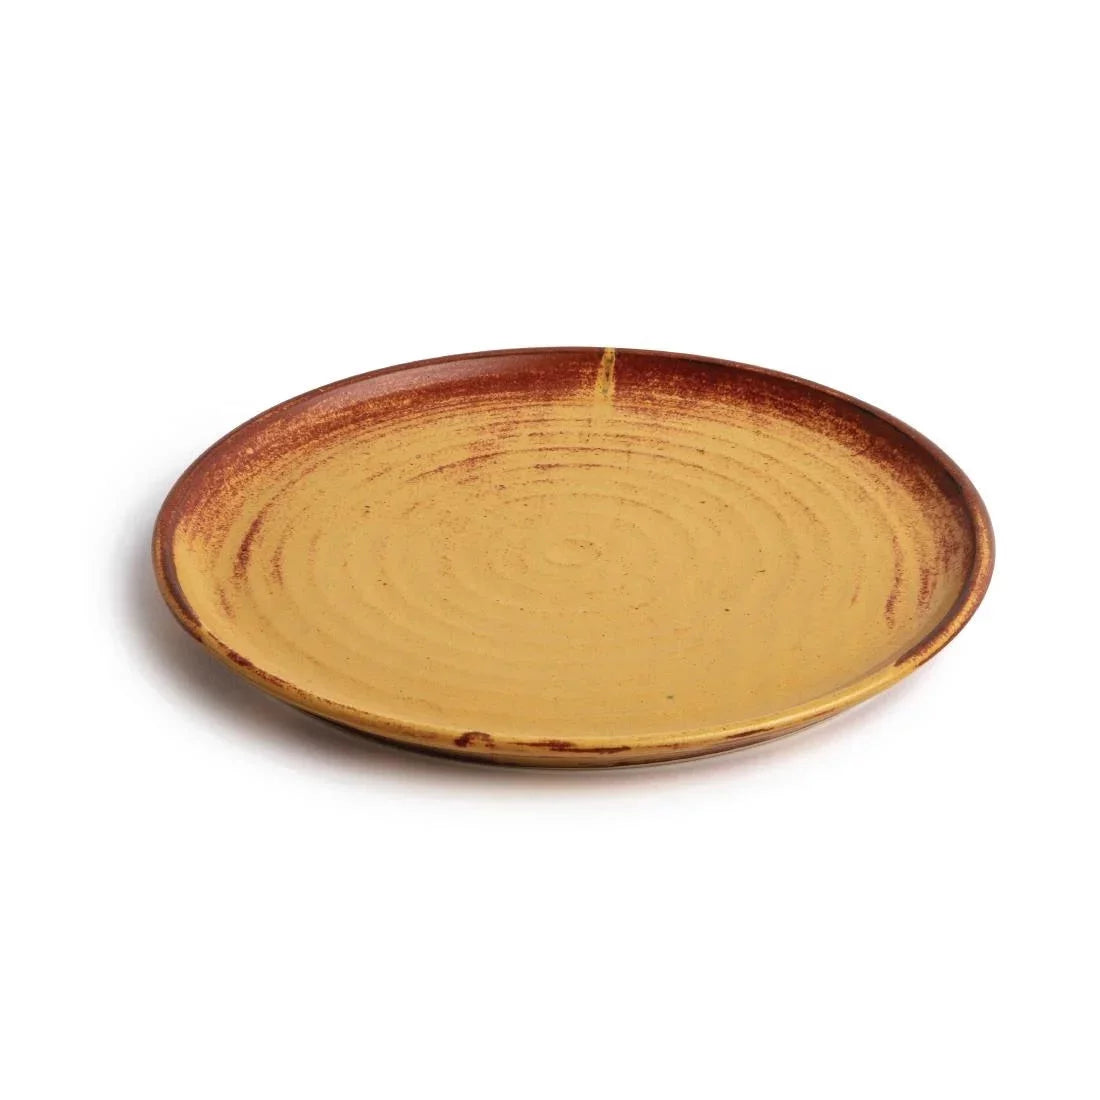 Olympia Canvas Small Rim Round Plate Sienna Rust 265mm Case Size 6